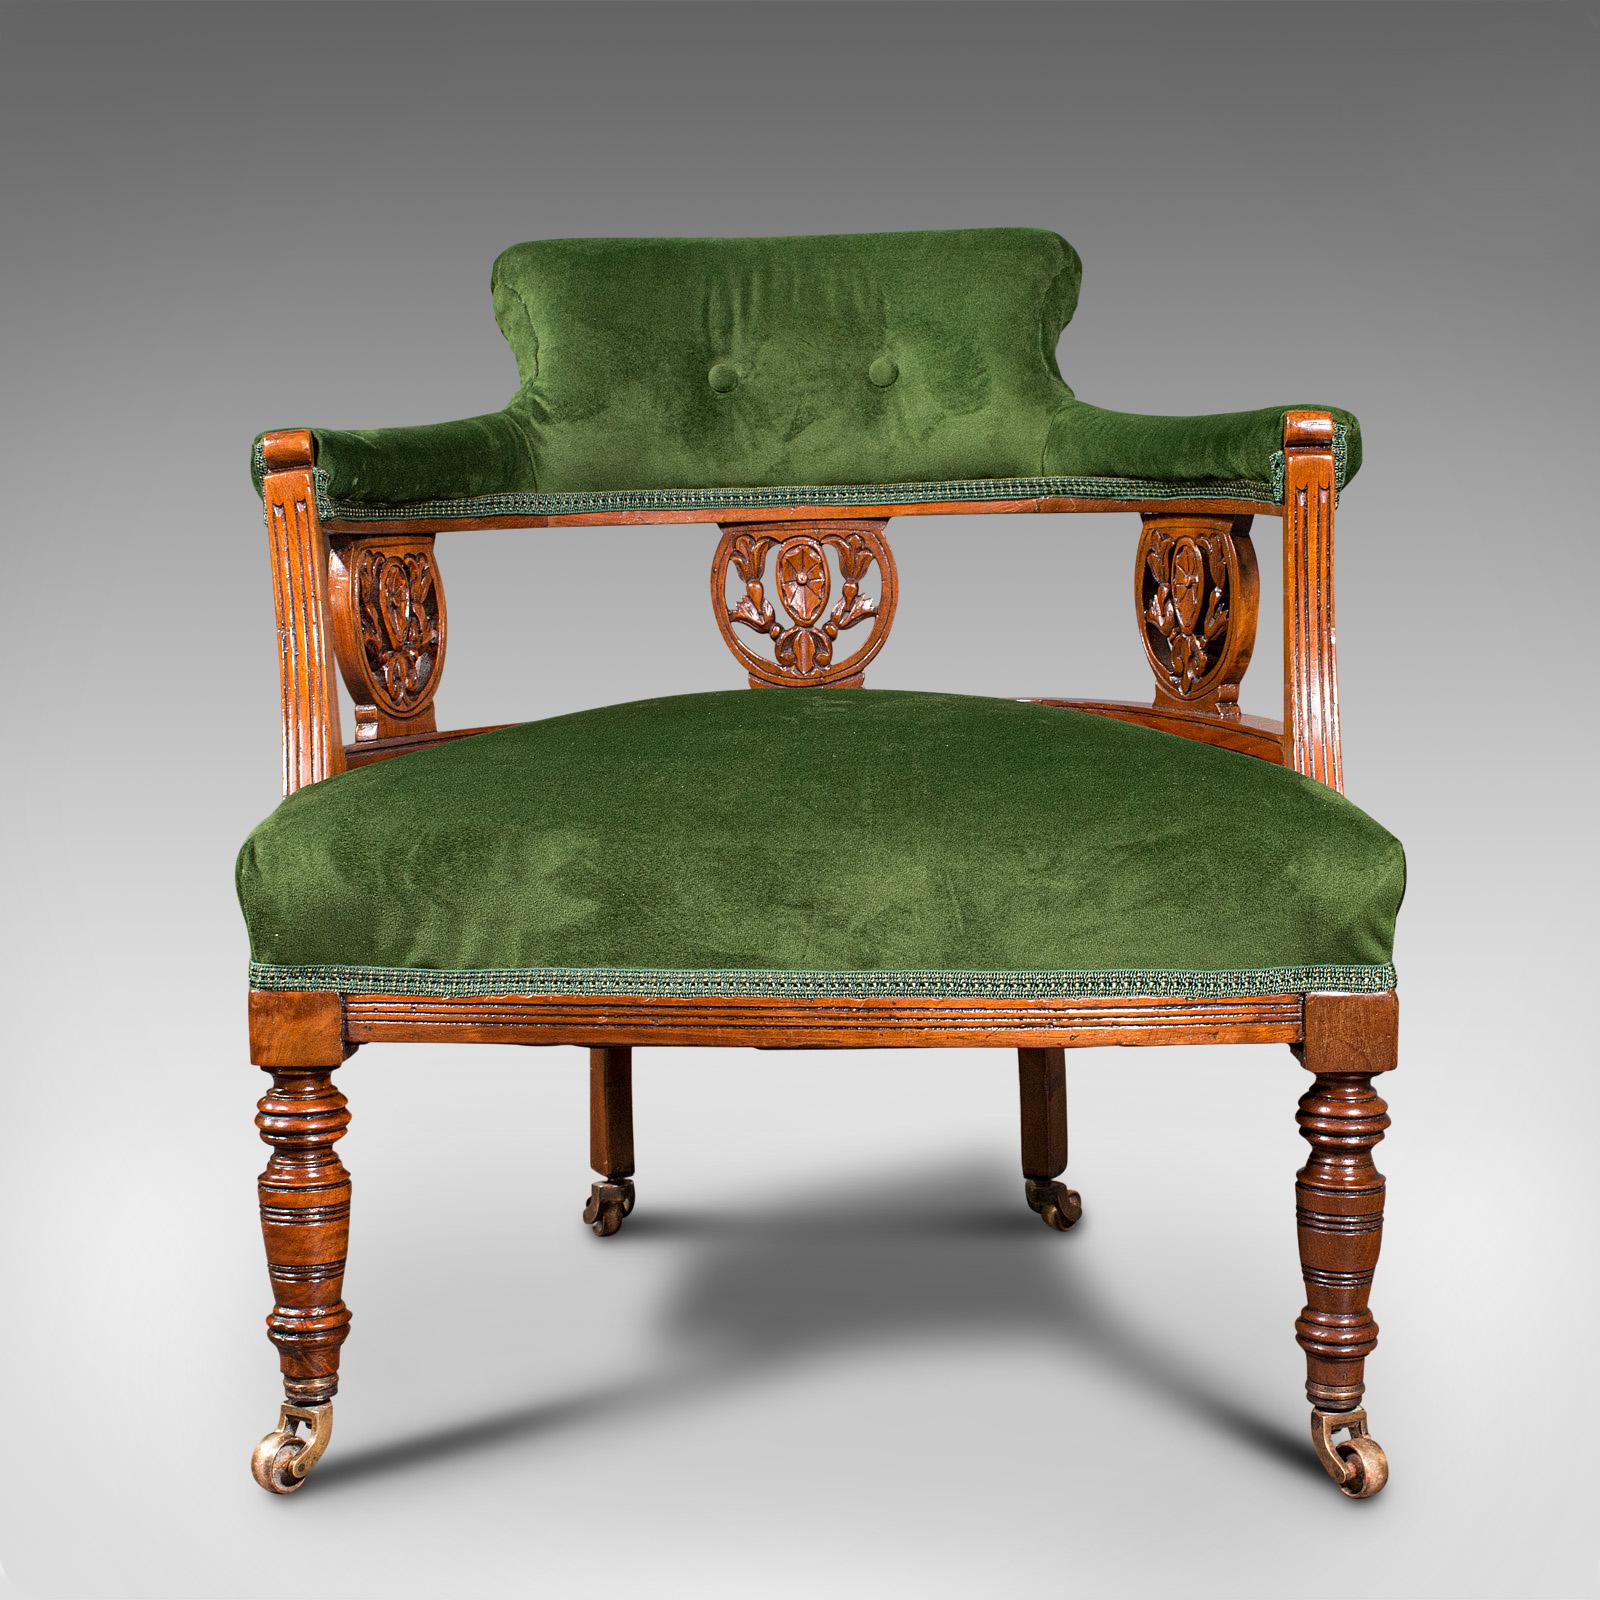 This is an antique tub chair. An English, velvet over mahogany elbow chair, dating to the Edwardian period, circa 1910.

Eye-catching colour and pleasingly diminutive in form
Displays a desirable aged patina throughout
Benefits from a recent